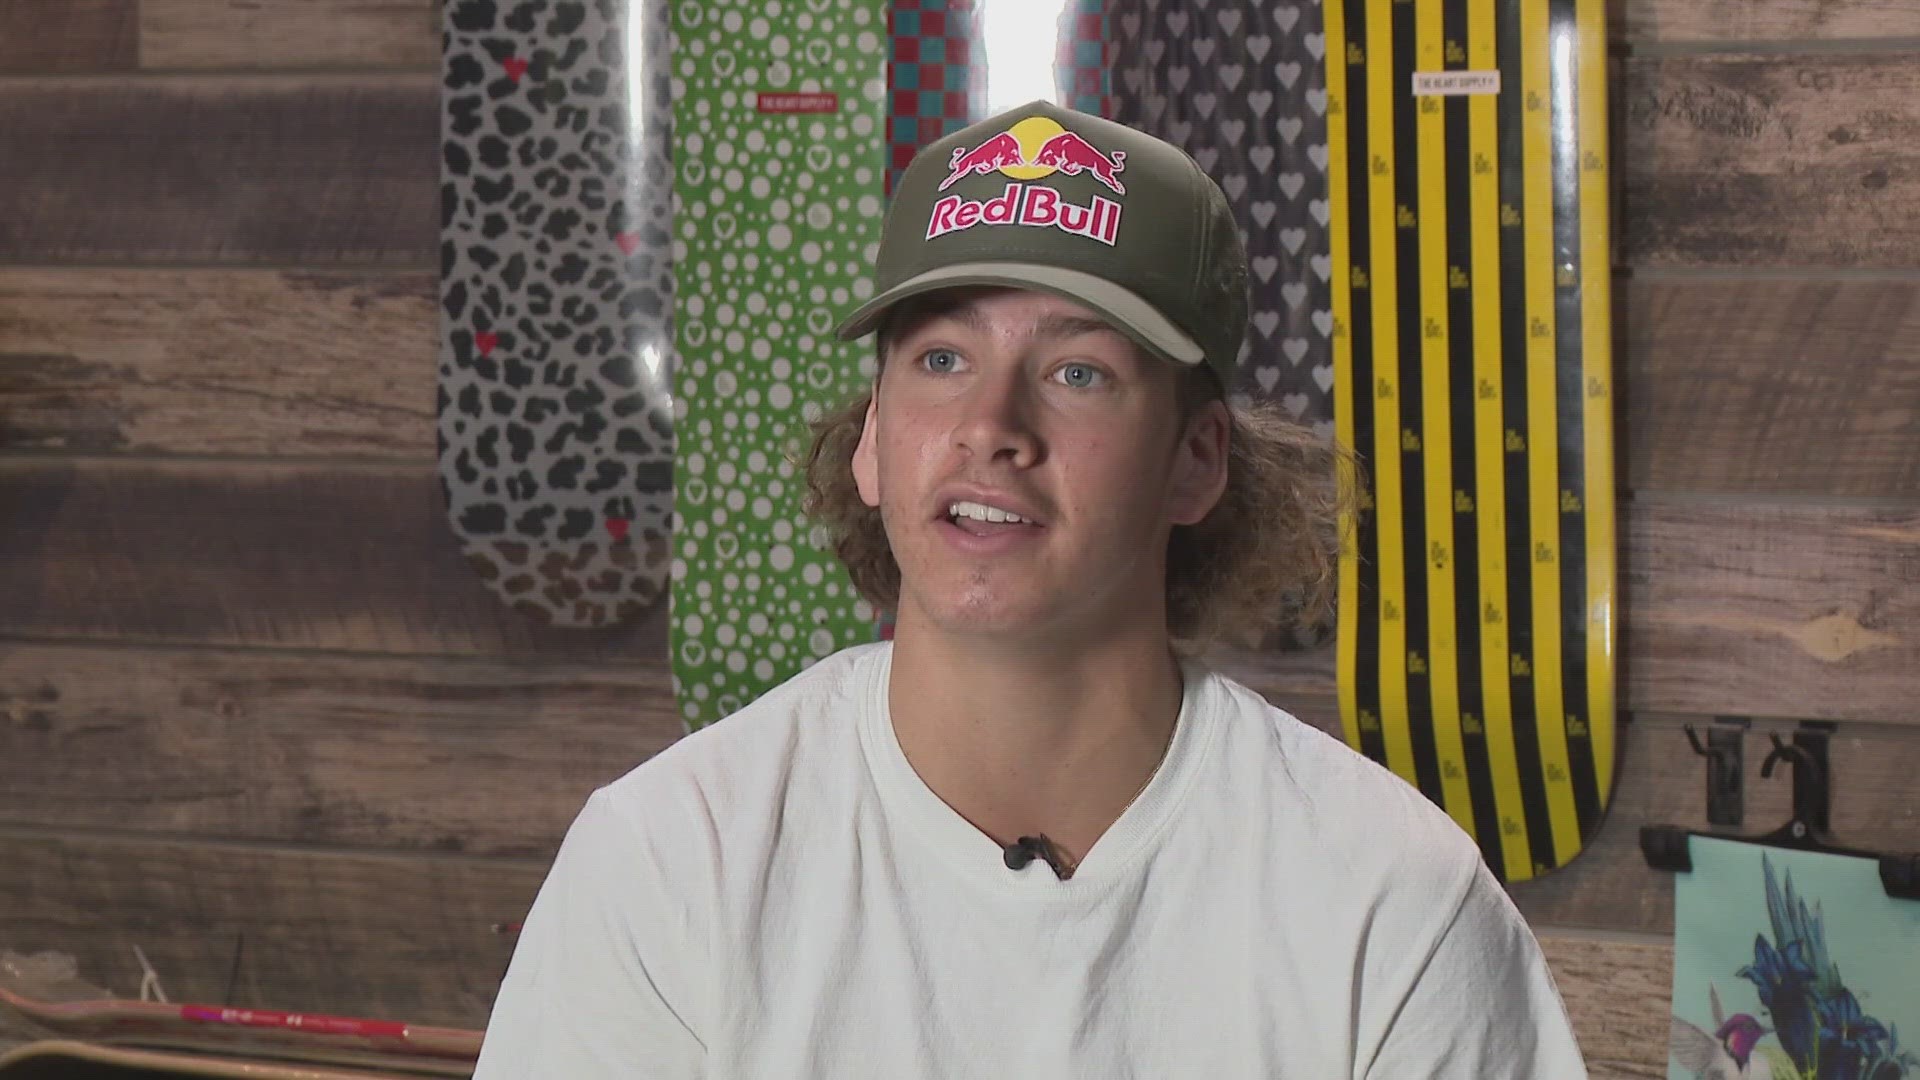 Mesa's Jagger Eaton made the Valley proud as one of the first people to bring home an Olympic medal in skateboarding.